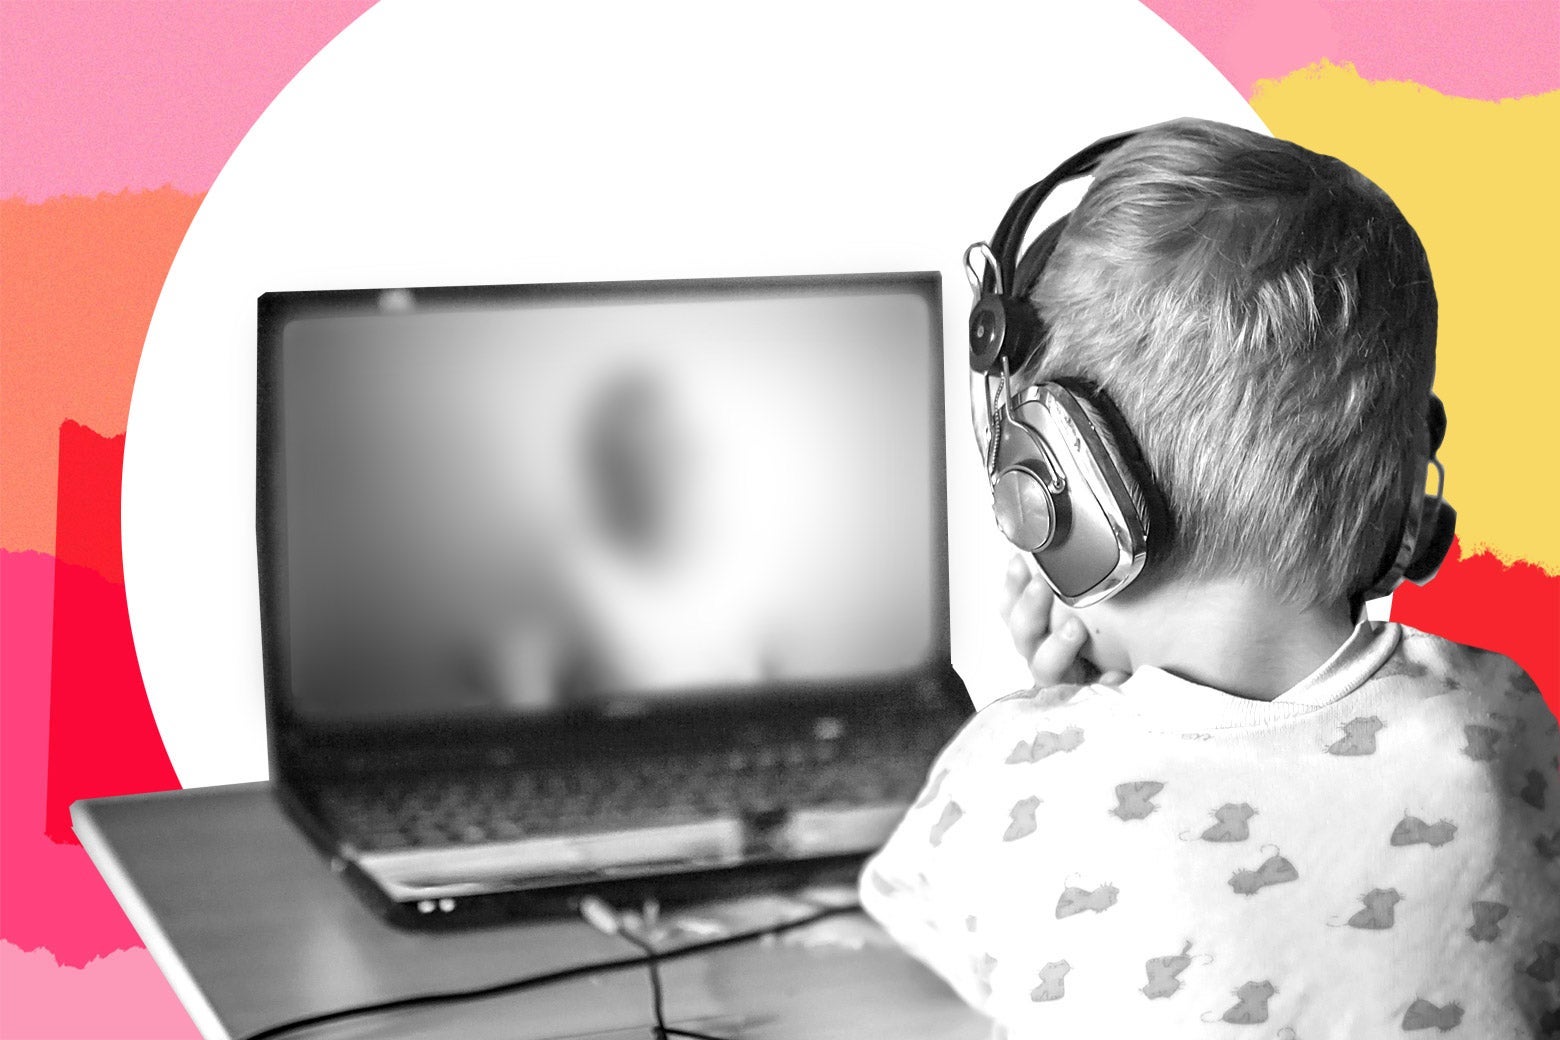 School Boy - Online school causing introduction to porn: parenting advice from Care and  Feeding.